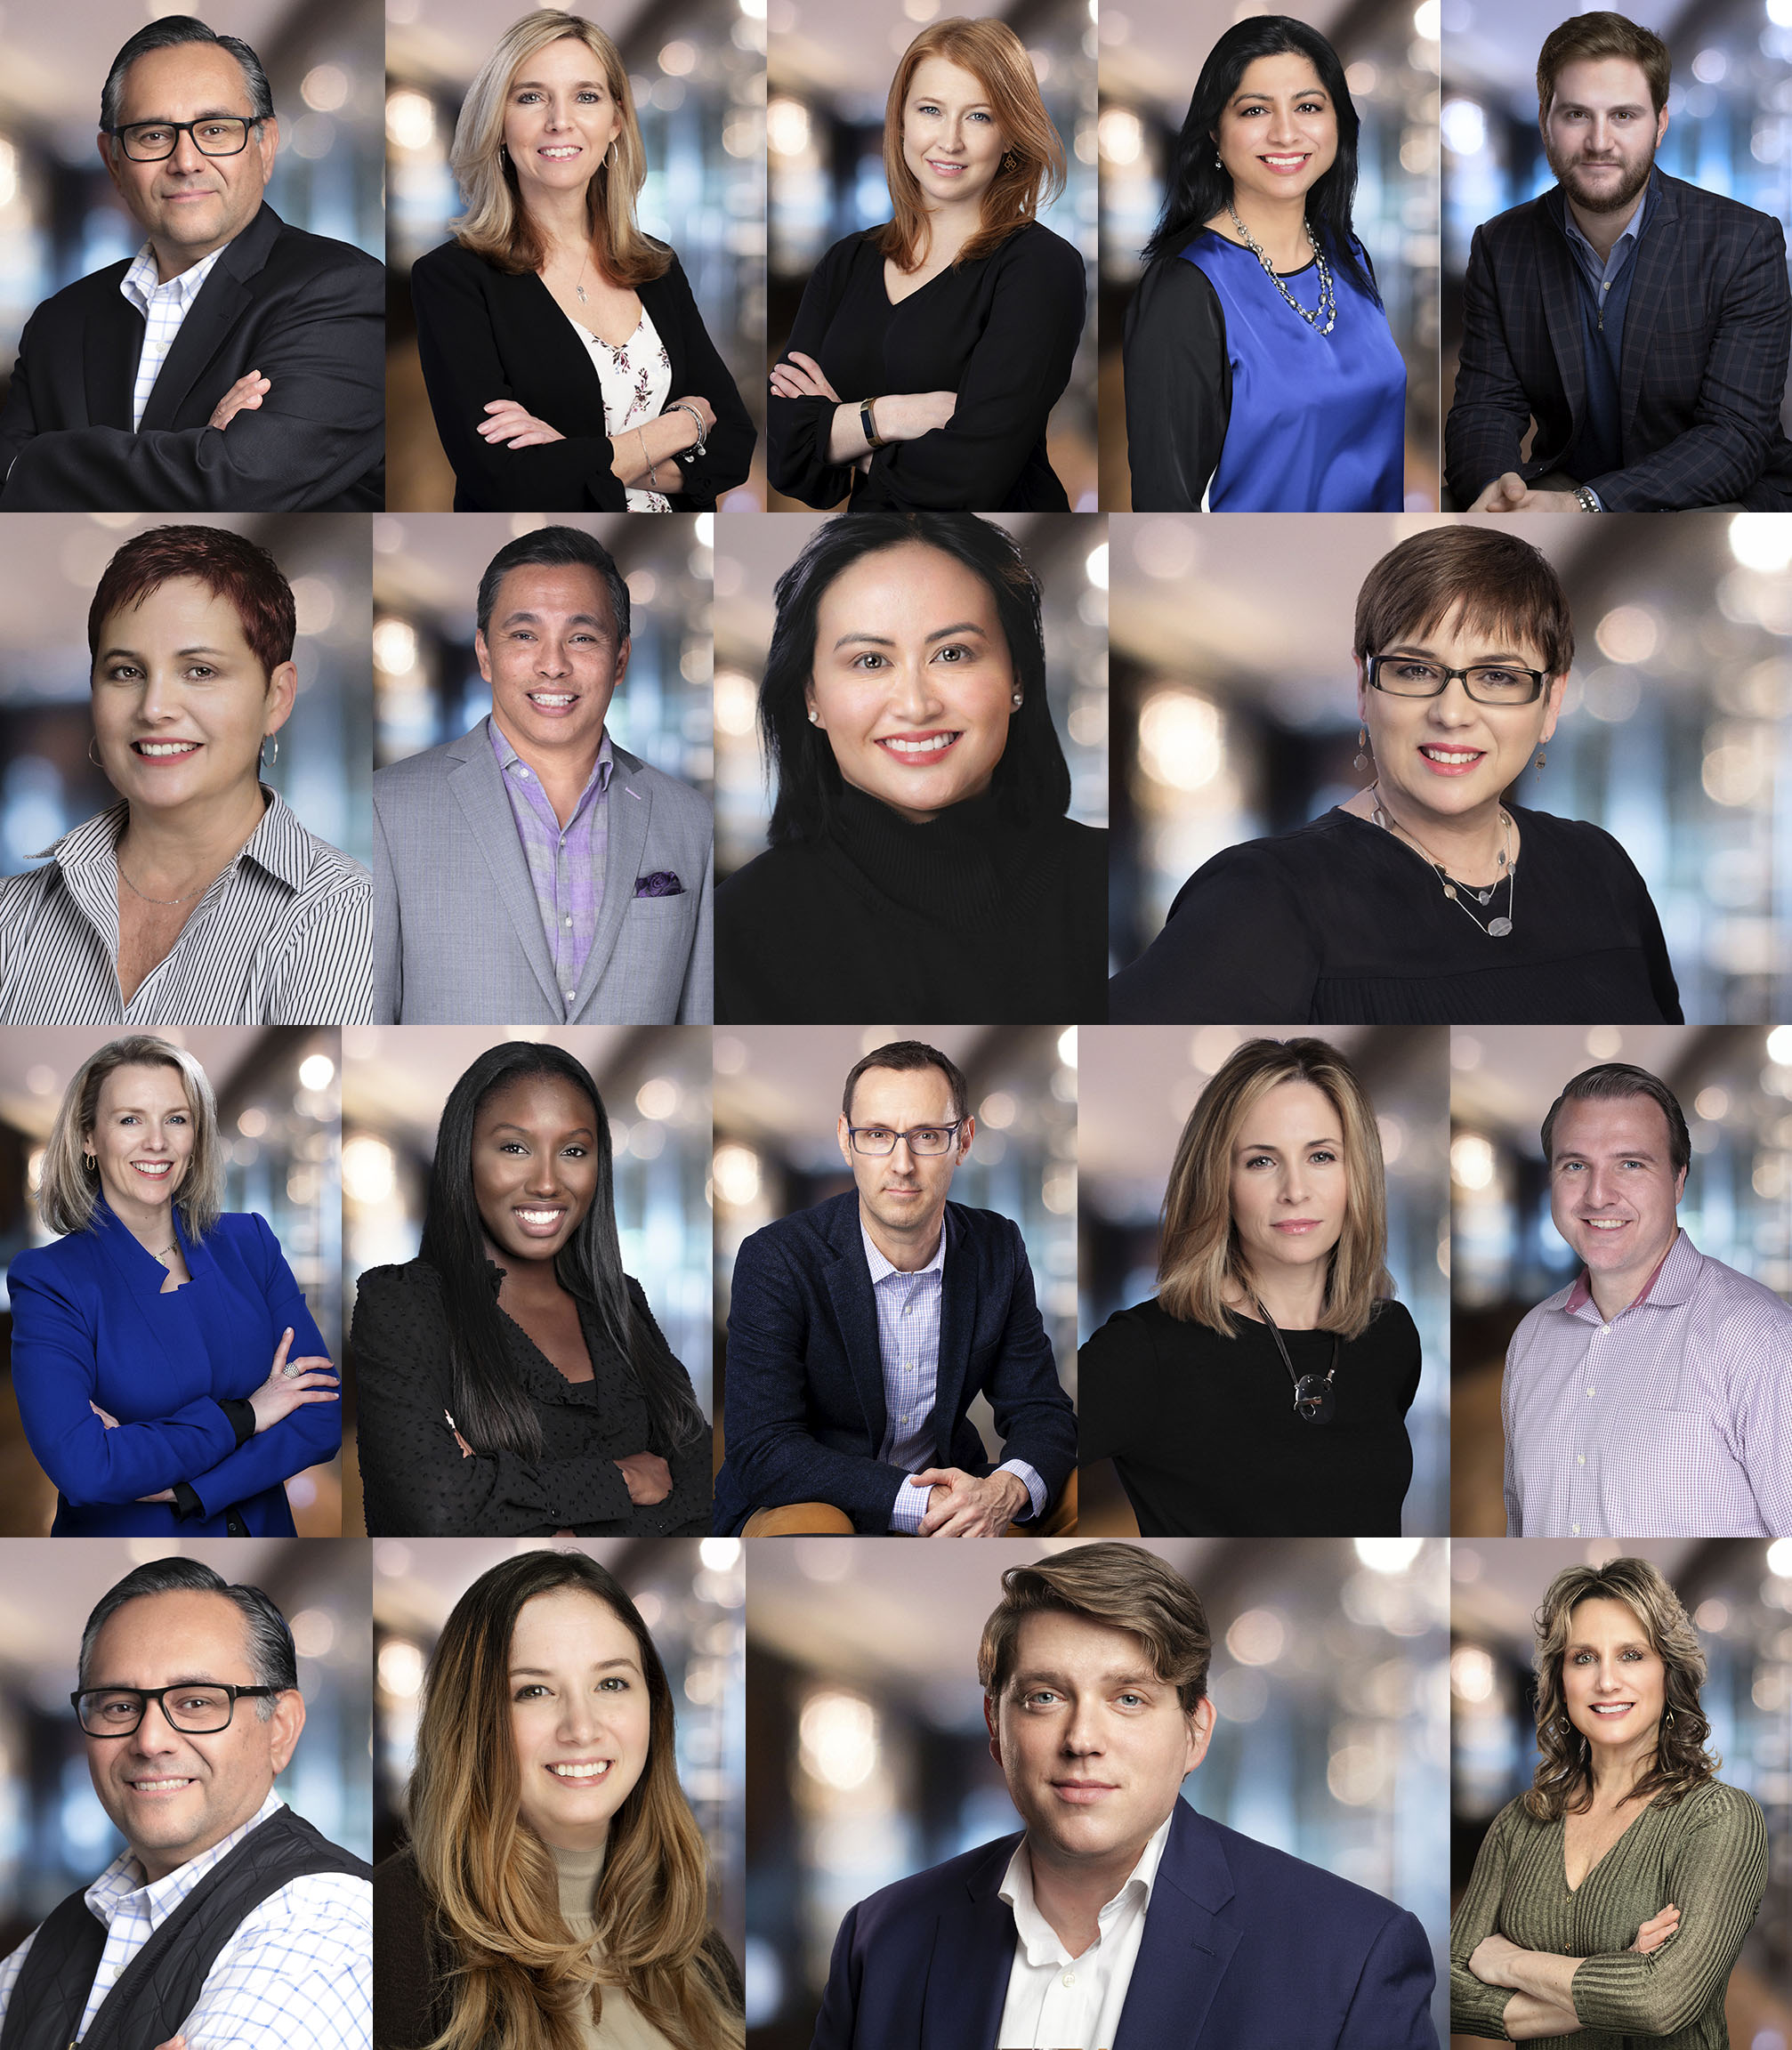 American Express Group Composite, Business Executive corporate headshots by the Best Professional Headshot photographer in NYC Tess Steinkolk